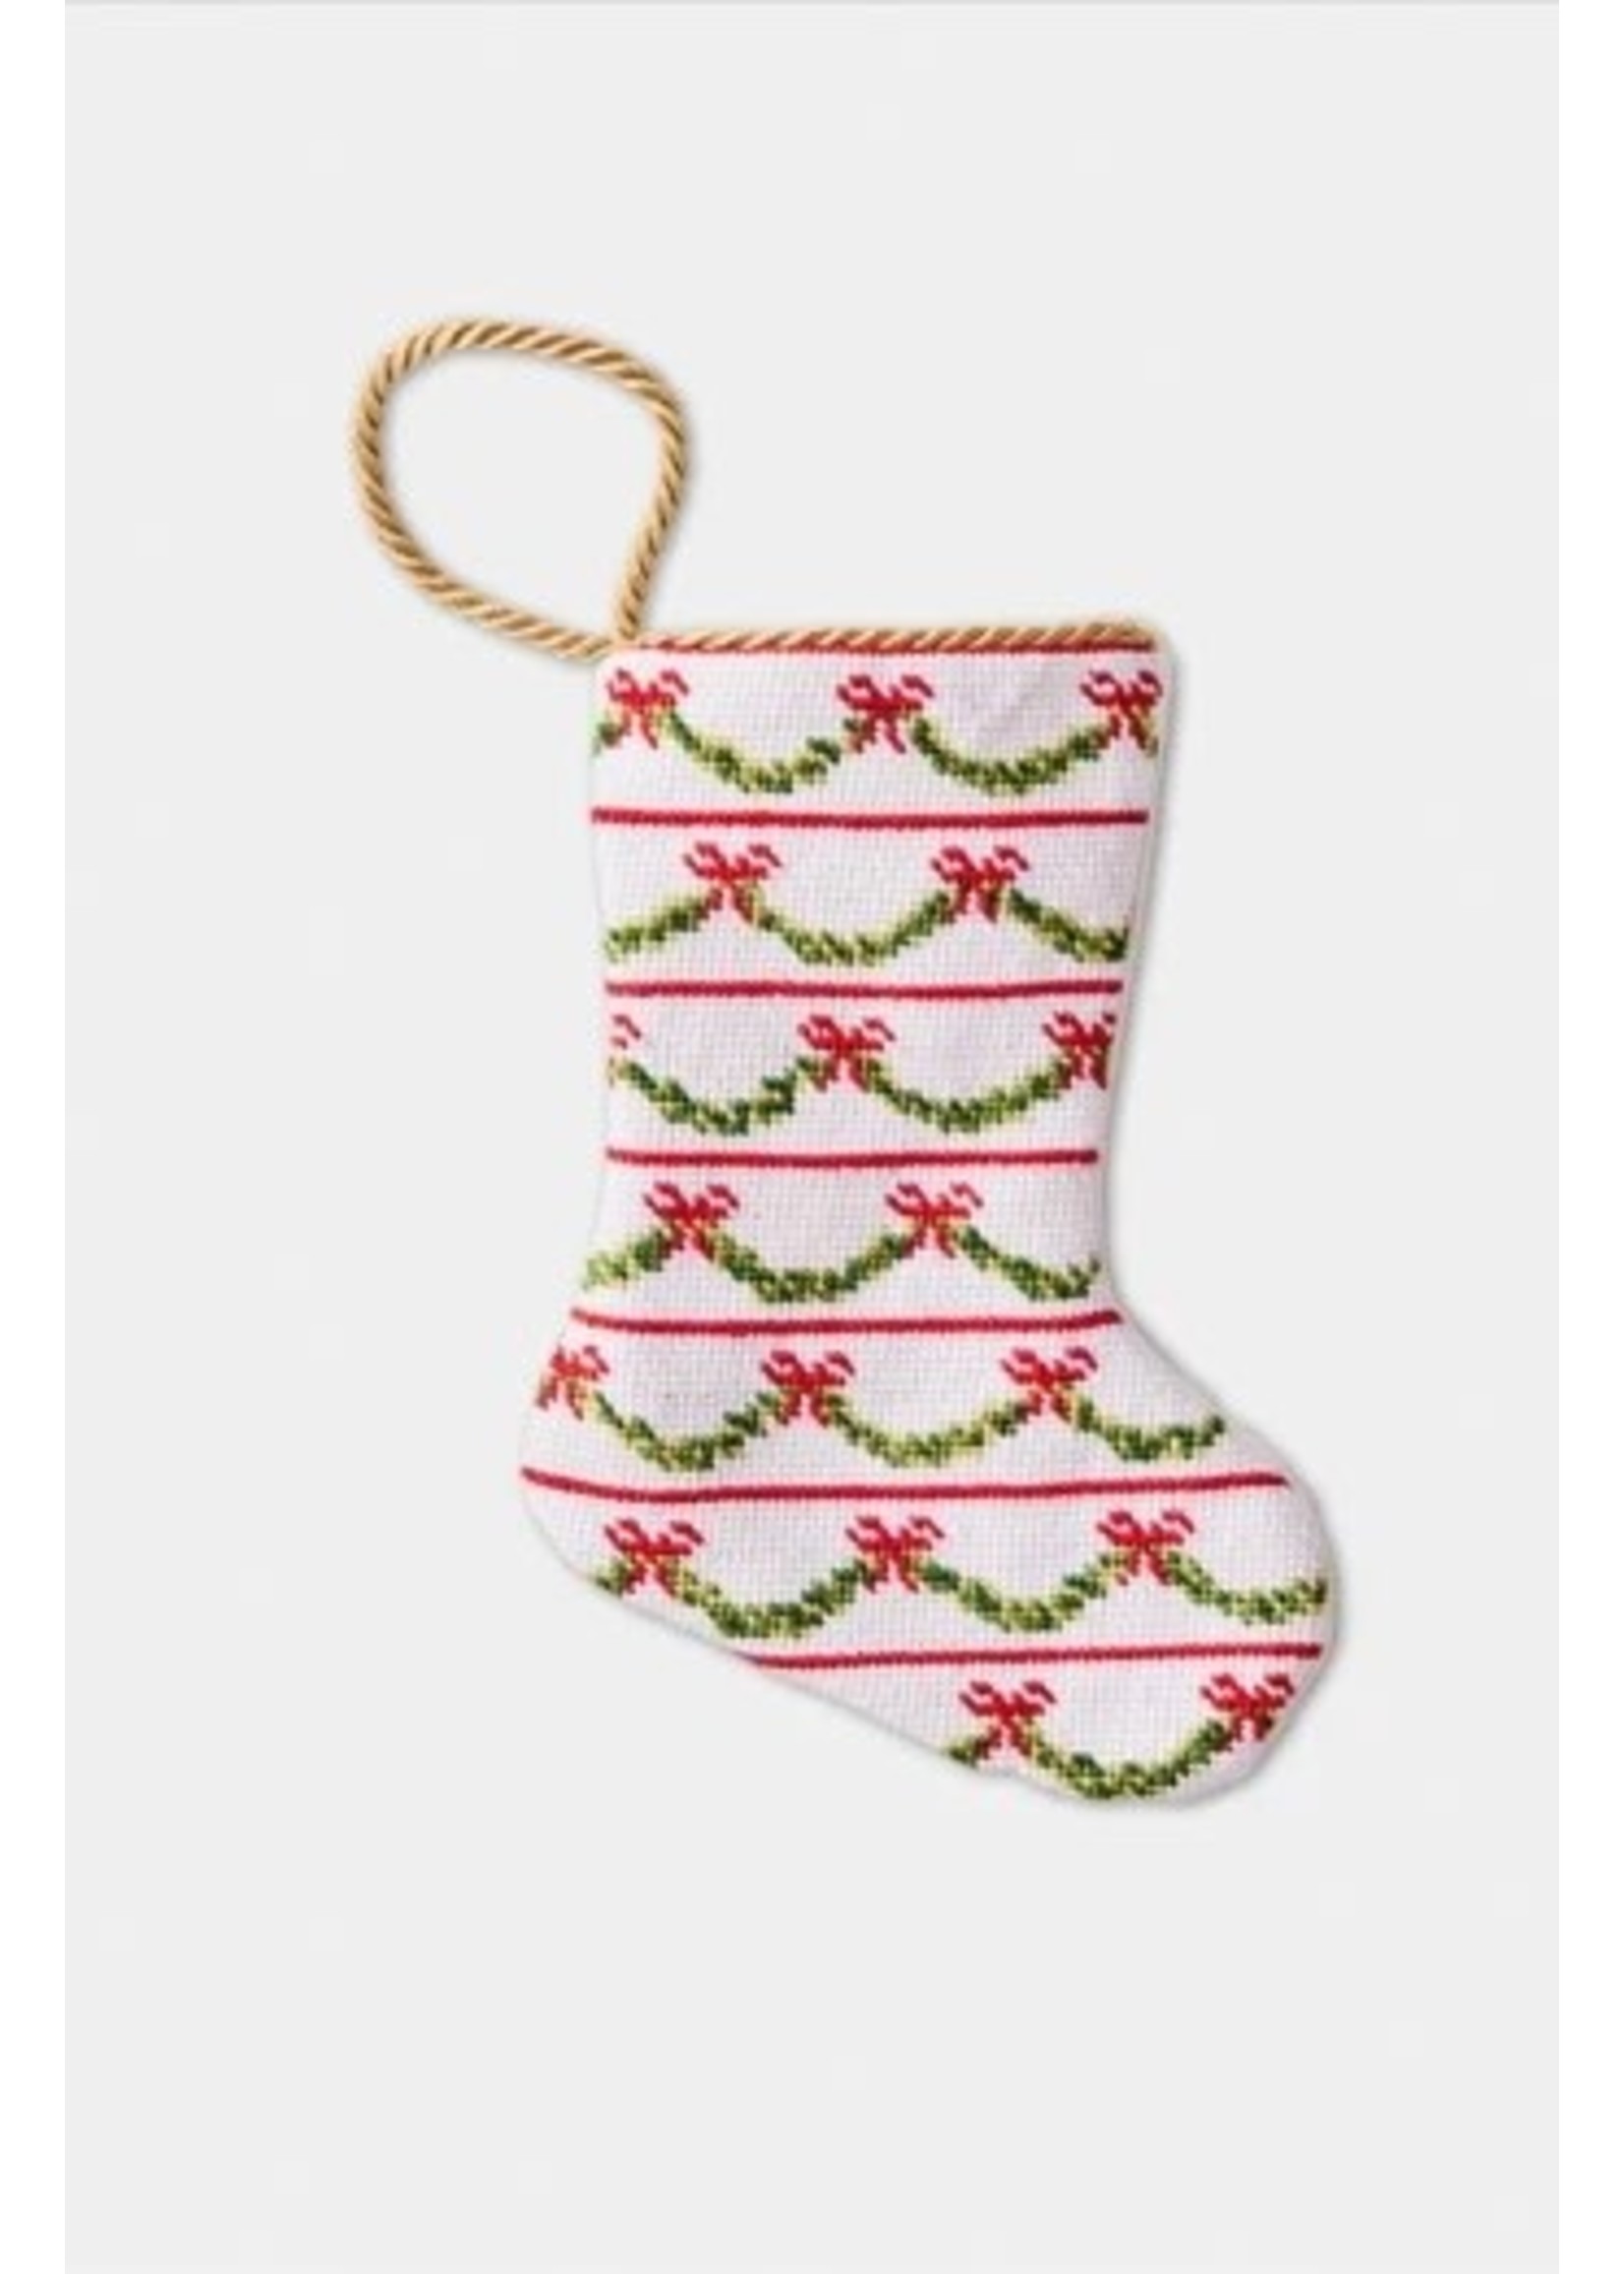 Bauble Stockings Bauble Stocking - Christmas Garland Gala by Dogwood Hill